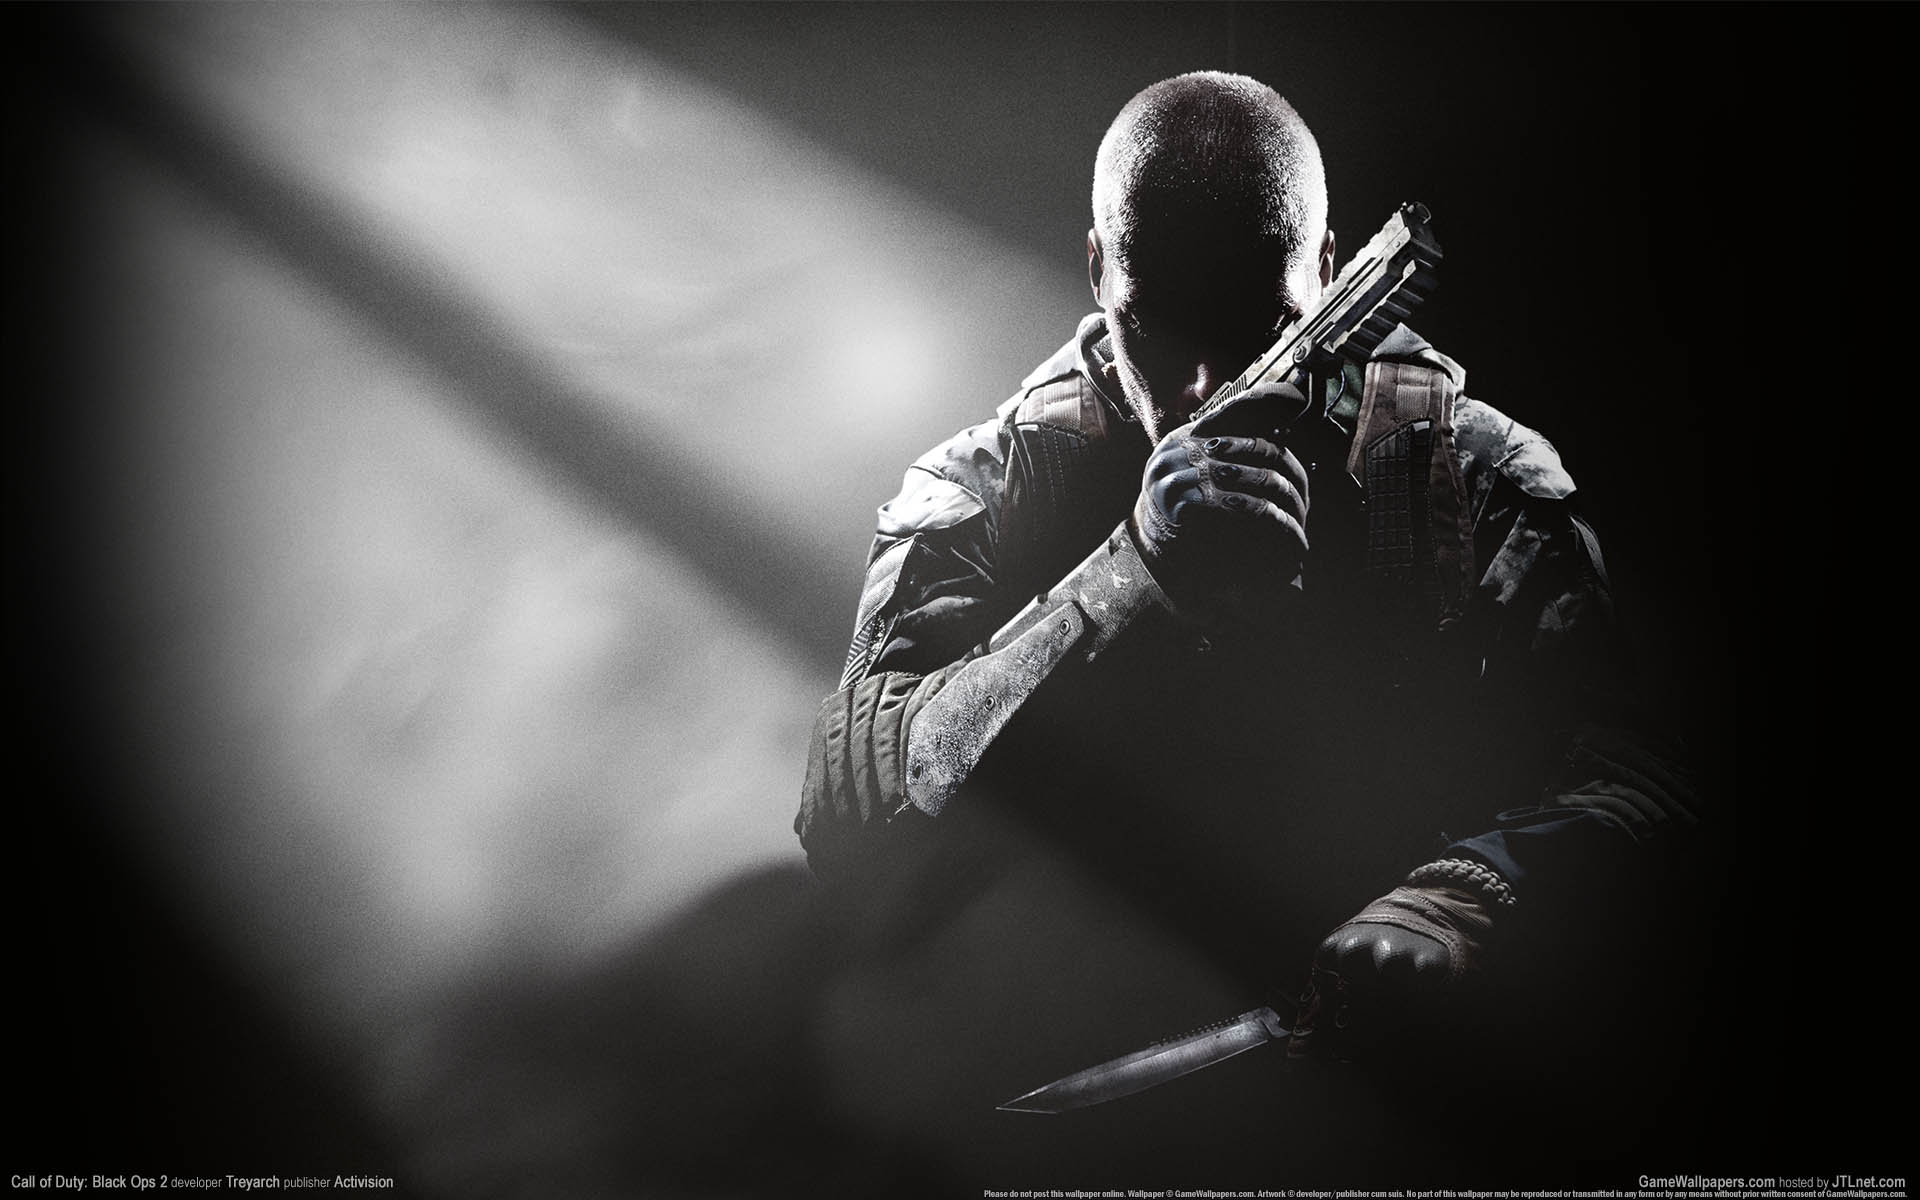 Call of Duty: Black Ops 2 achtergrond 01 1920x1200